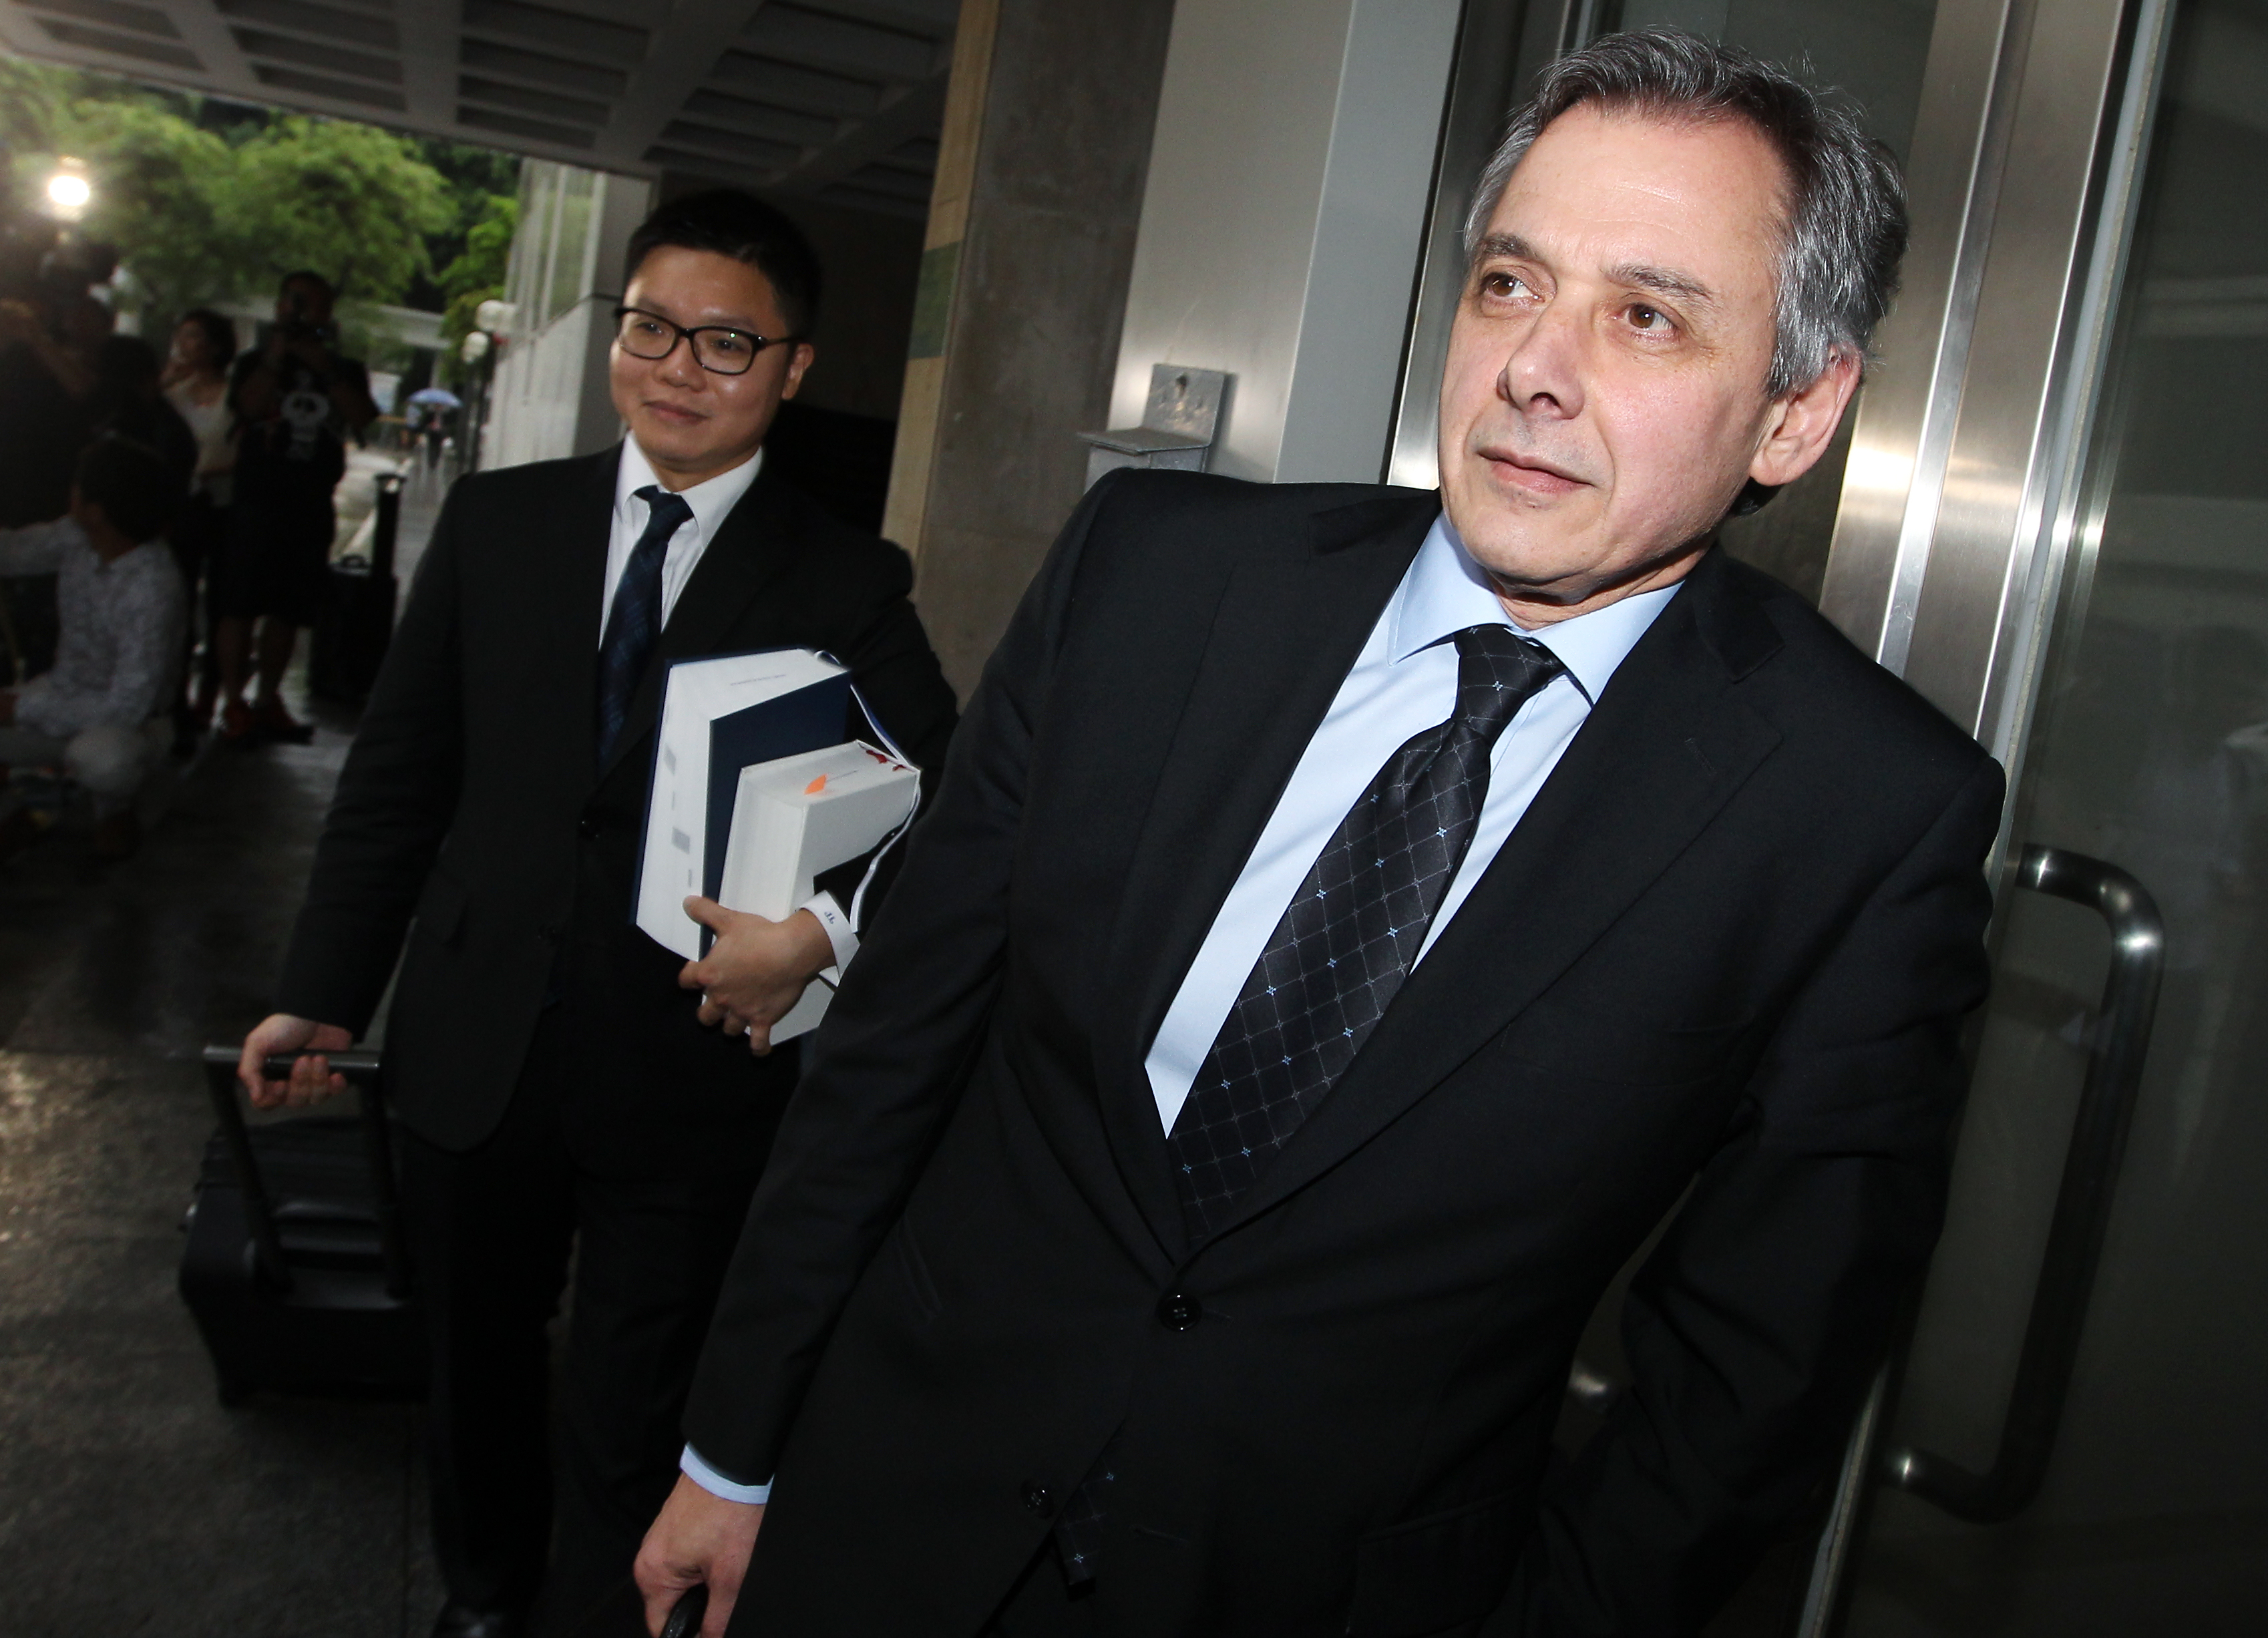 Kevin Zervos (right), Director of Public Prosecutions, appears in High Court on behalf of the Independent Commission Against Corruption over its request for journalistic materials from Commercial Broadcasting and iSunAffairs relating to Lew Mon-hung. 05SEP13